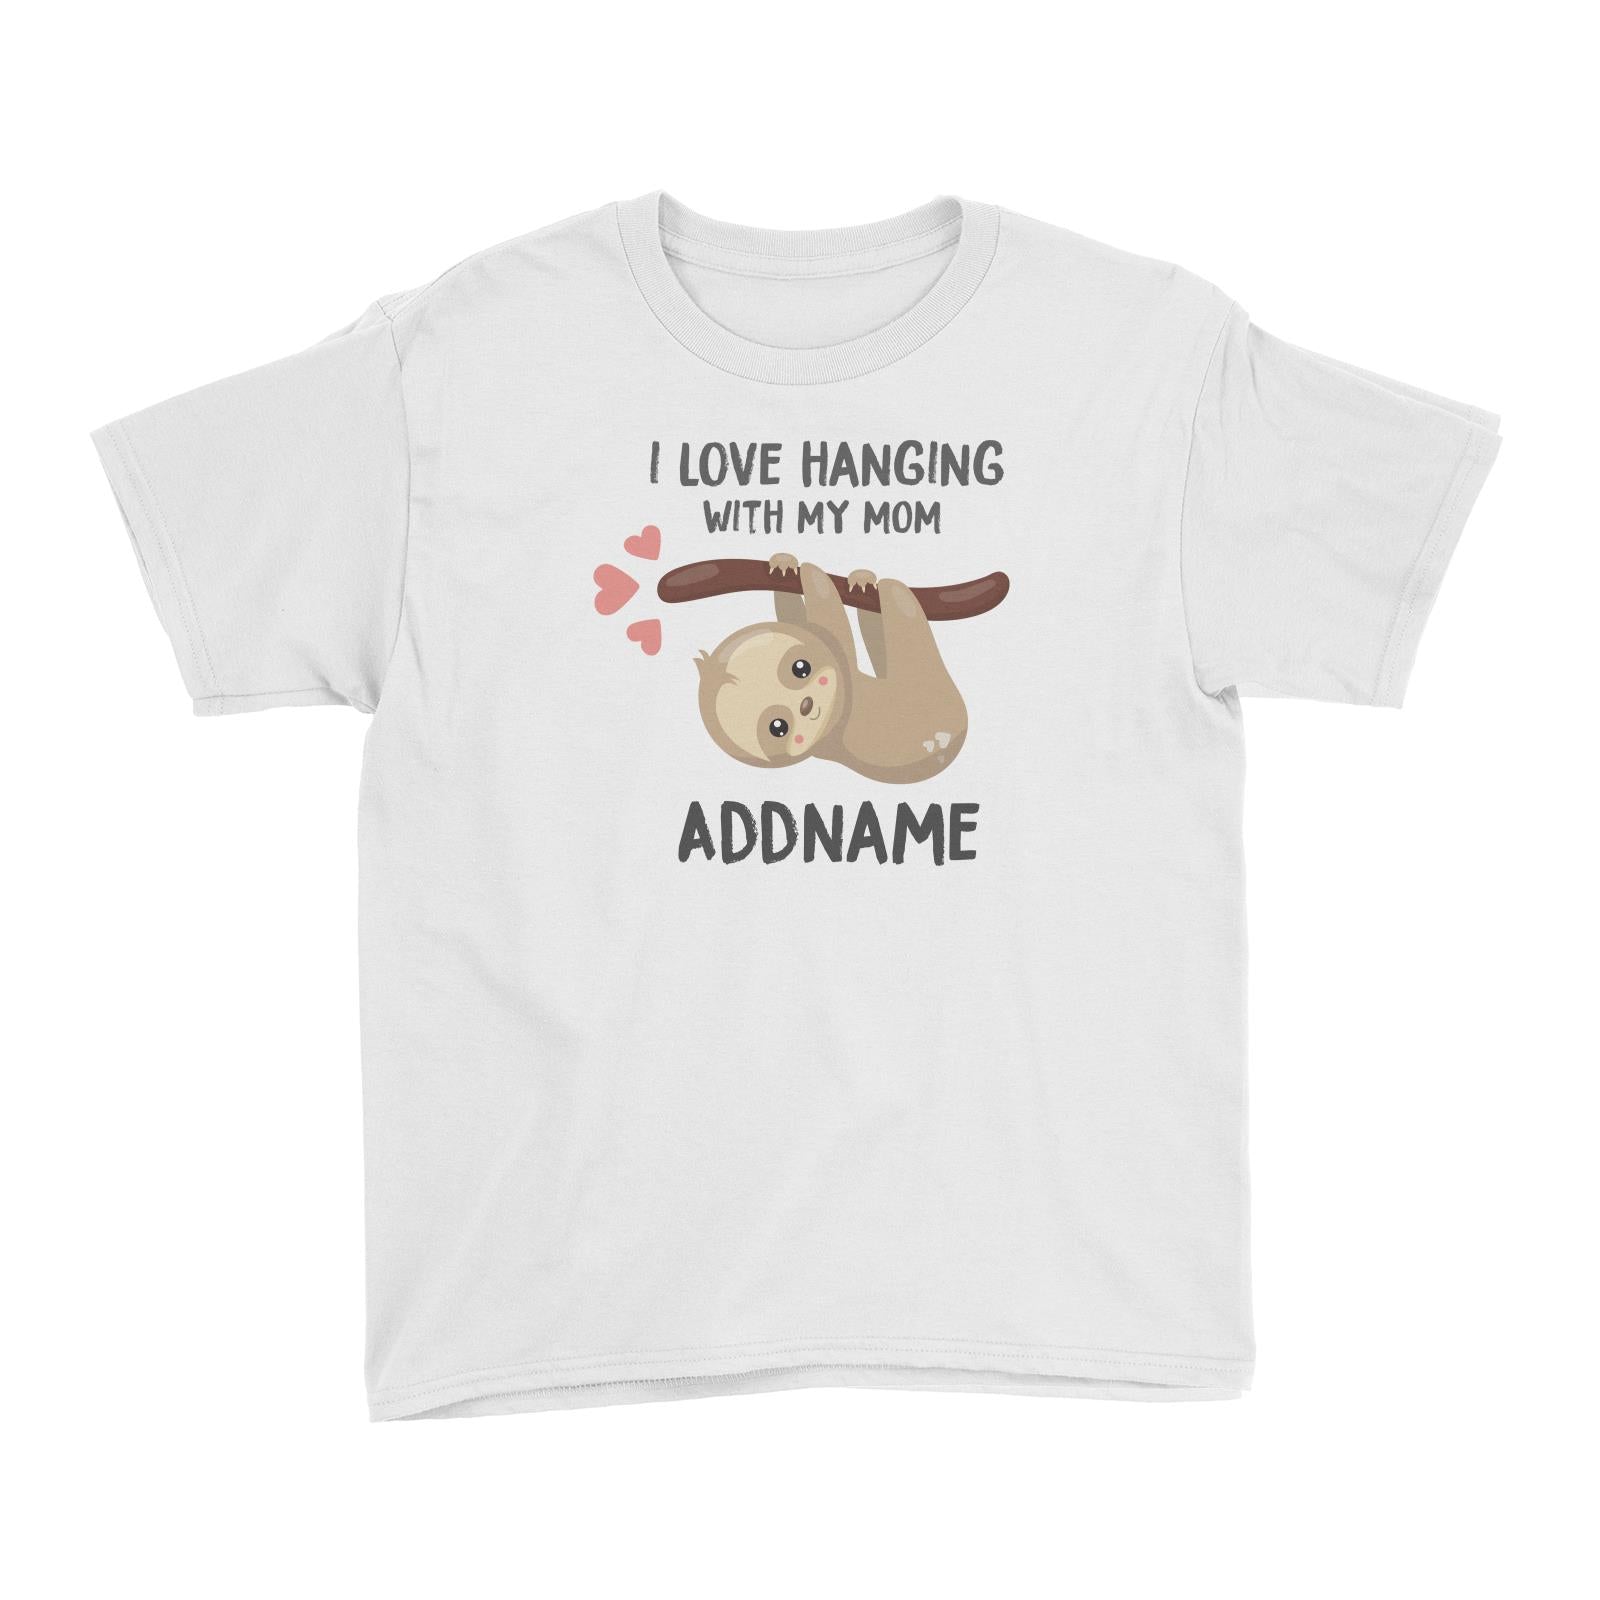 Cute Sloth I Love Hanging With My Mom Addname Kid's T-Shirt